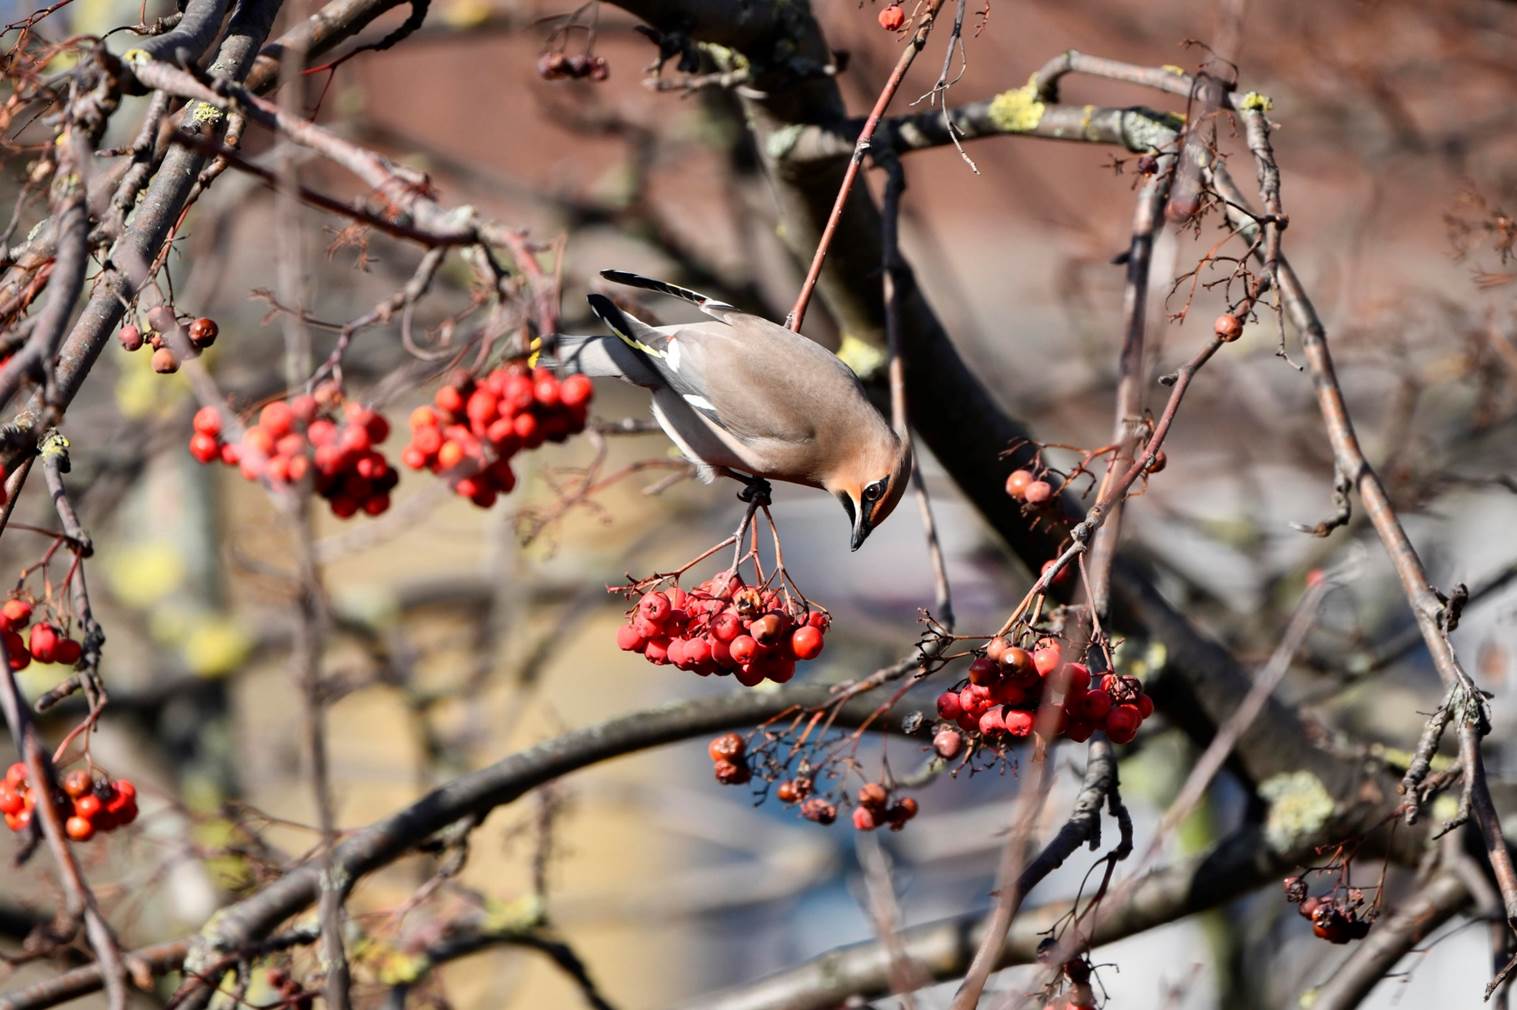 A bird on a tree branch with berries

Description automatically generated